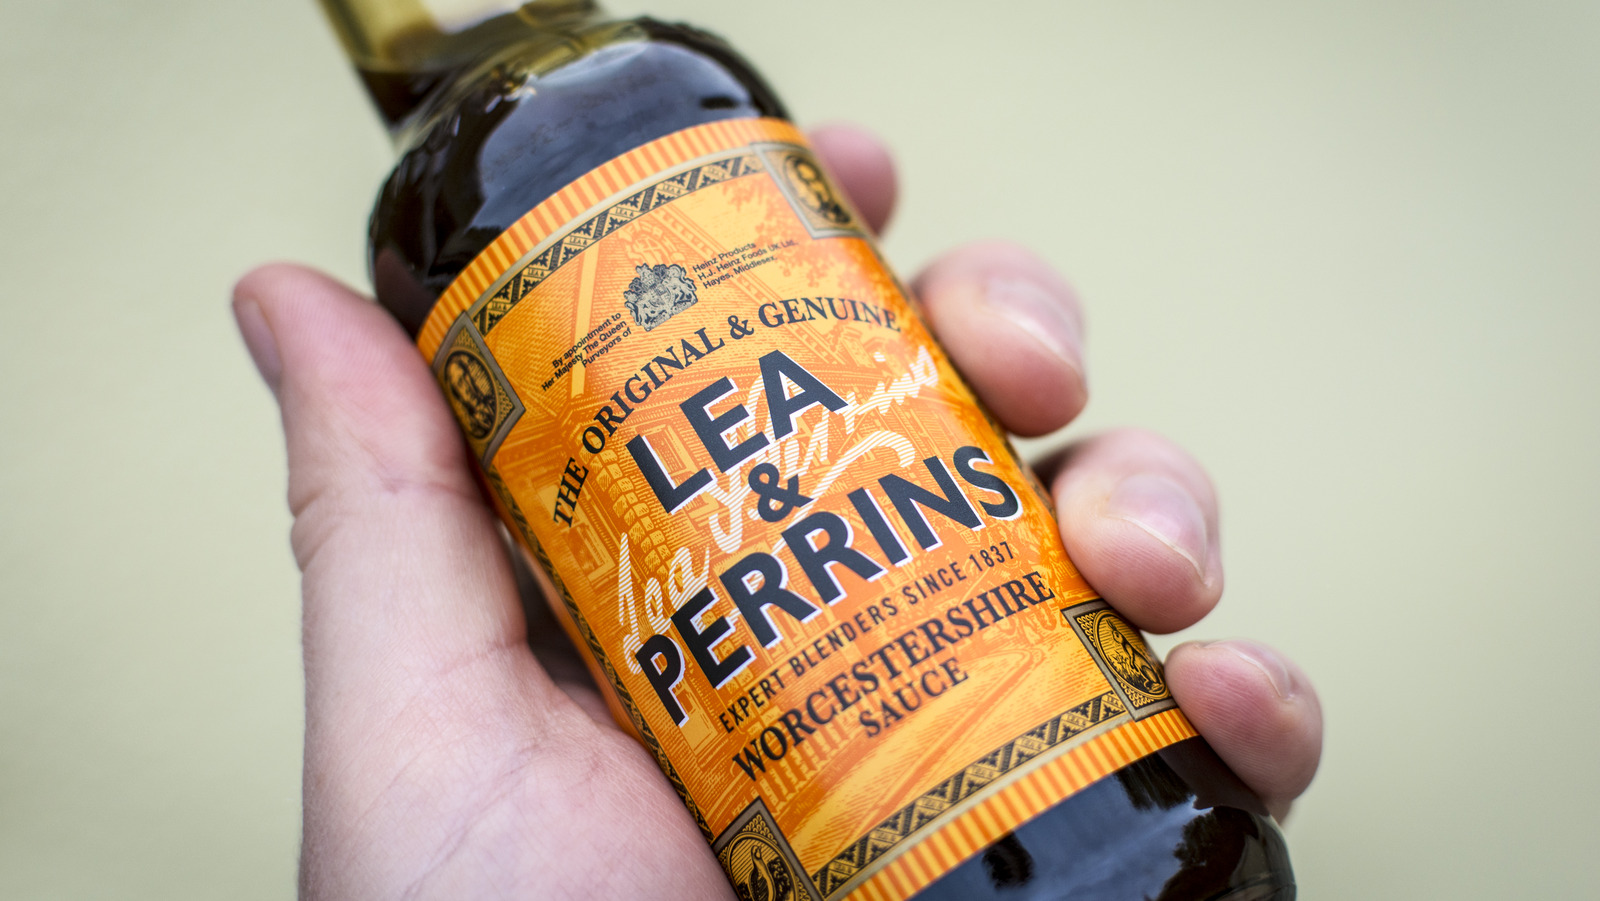 What is Worcestershire sauce? We've answered all your burning